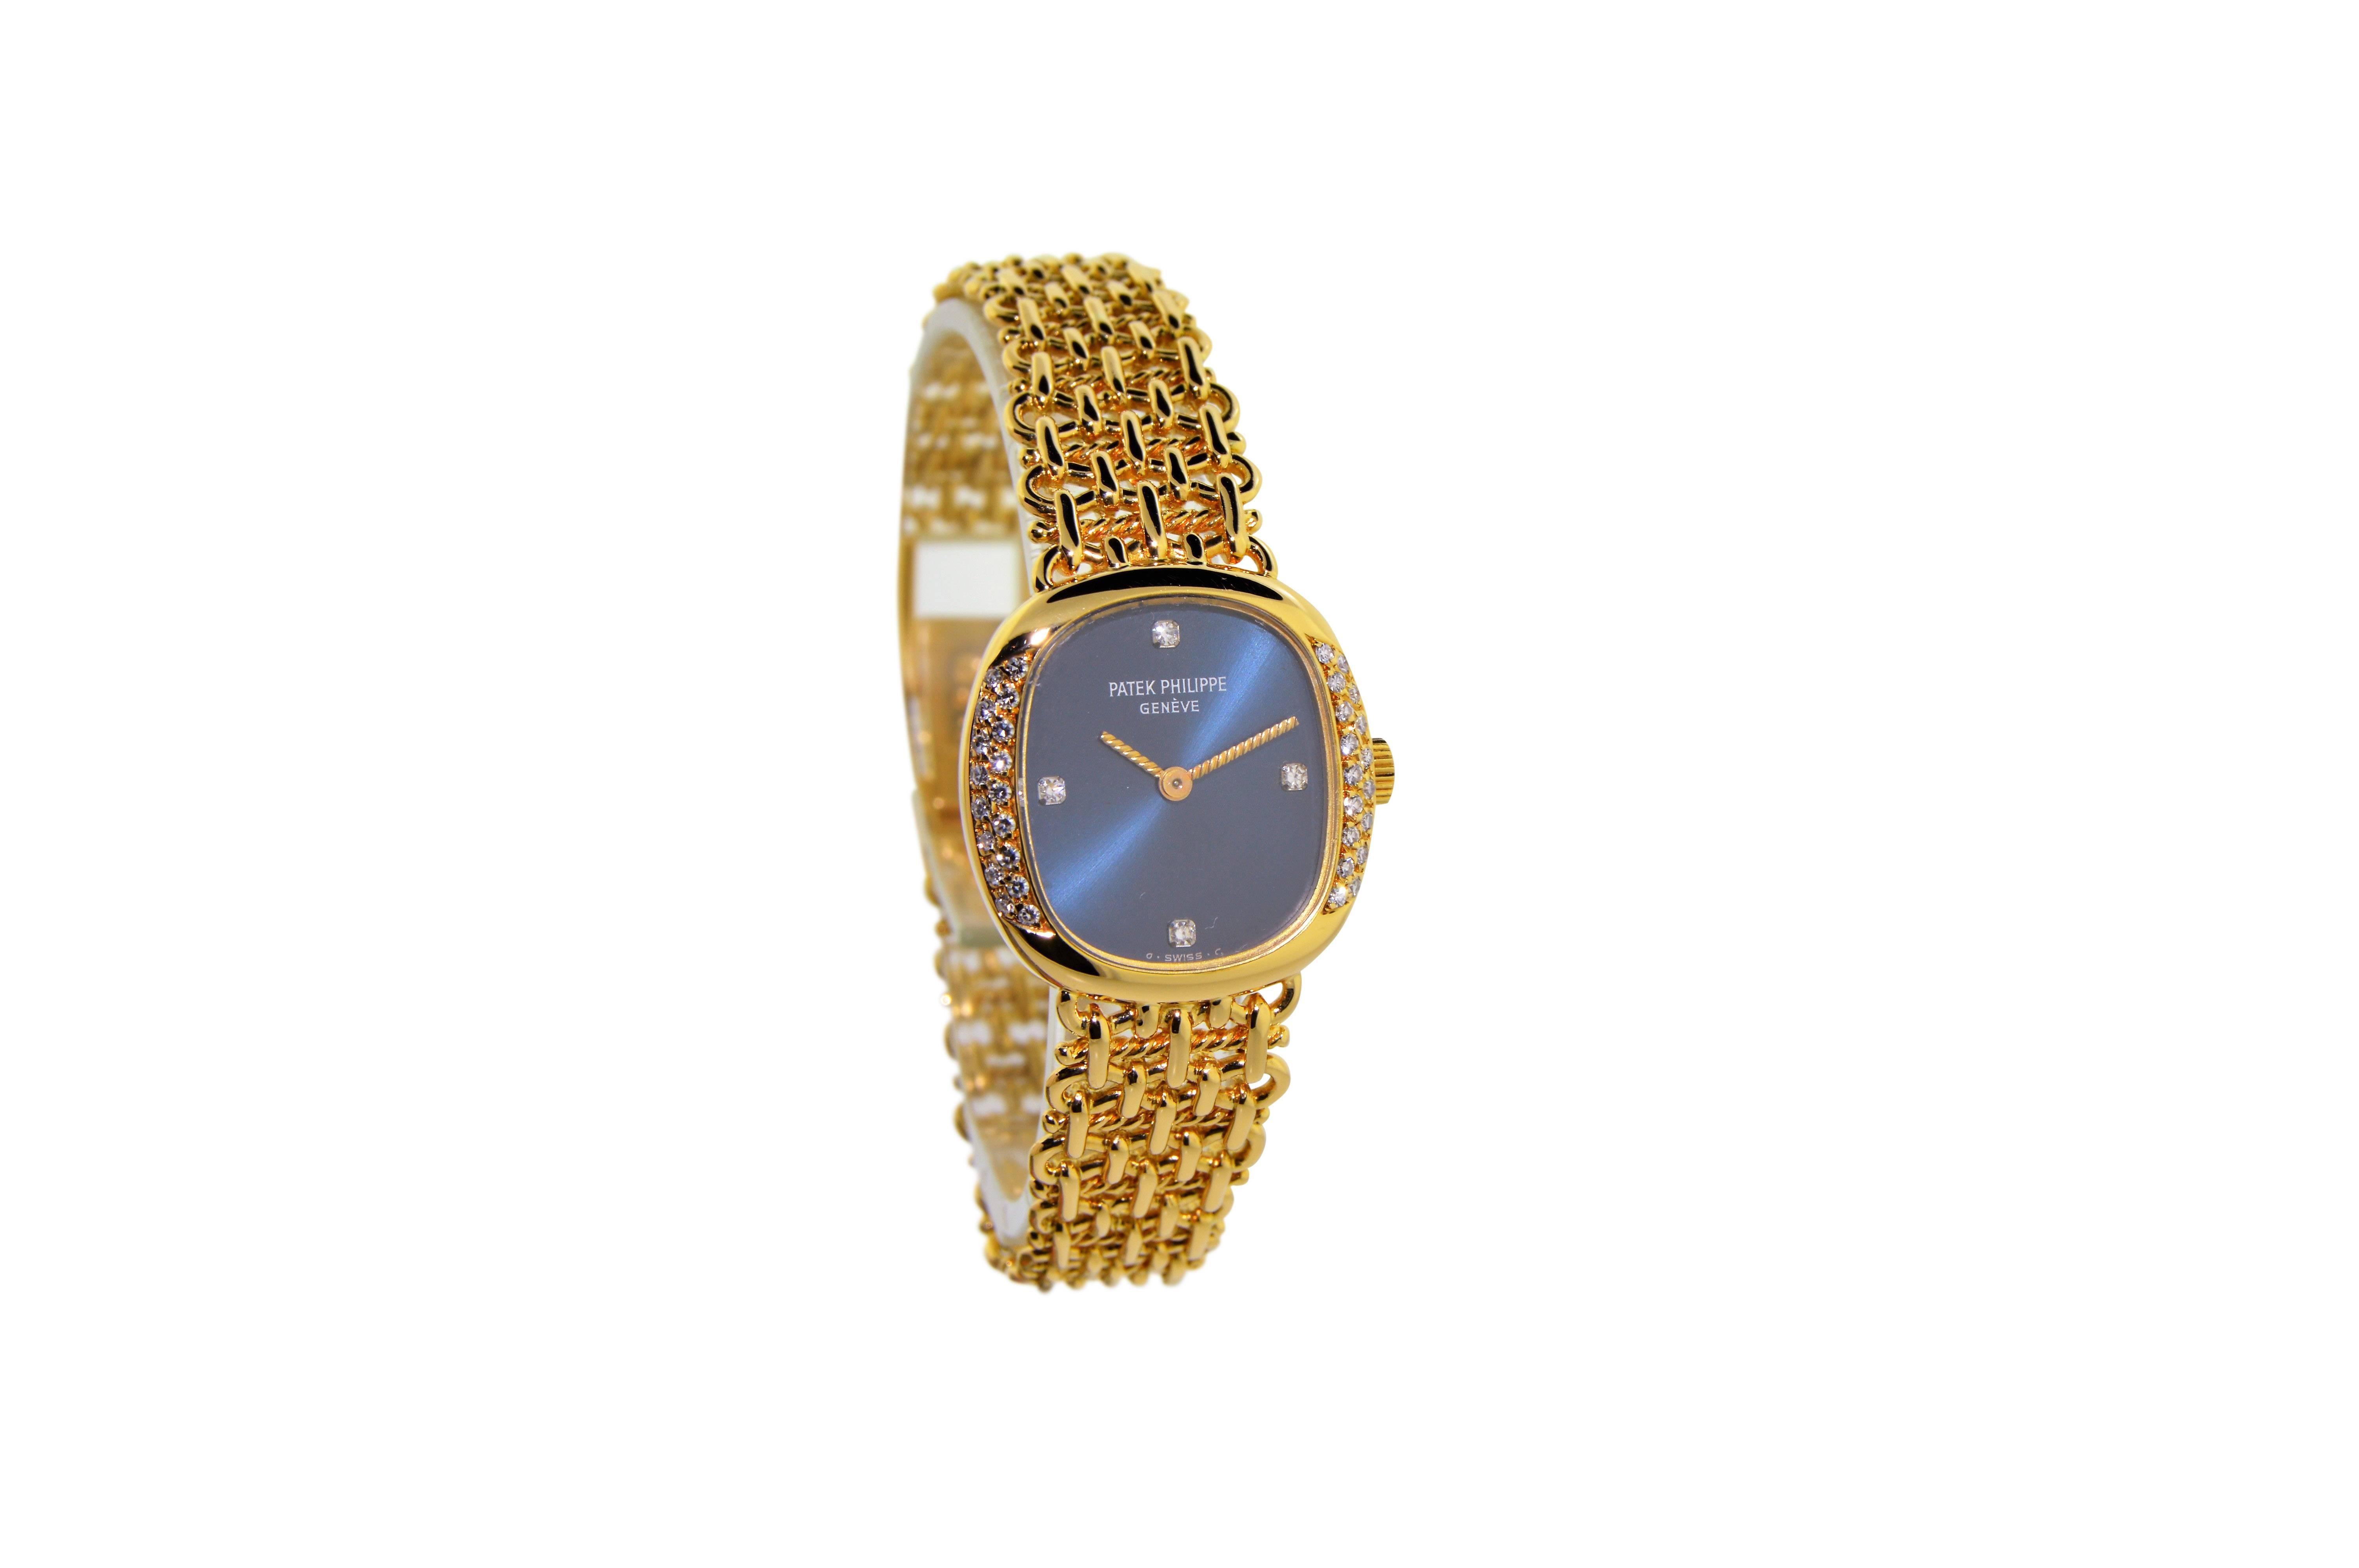 FACTORY / HOUSE: Patek Philippe 
STYLE / REFERENCE: Constructed Link Dress Bracelet Watch / Ref. 4514 1
METAL / MATERIAL: 18Kt. Yellow Gold
DIMENSIONS:  22mm  X  22mm
CIRCA: 1980's
MOVEMENT / CALIBER: 18 Jewels / Manual Winding 
DIAL / HANDS: